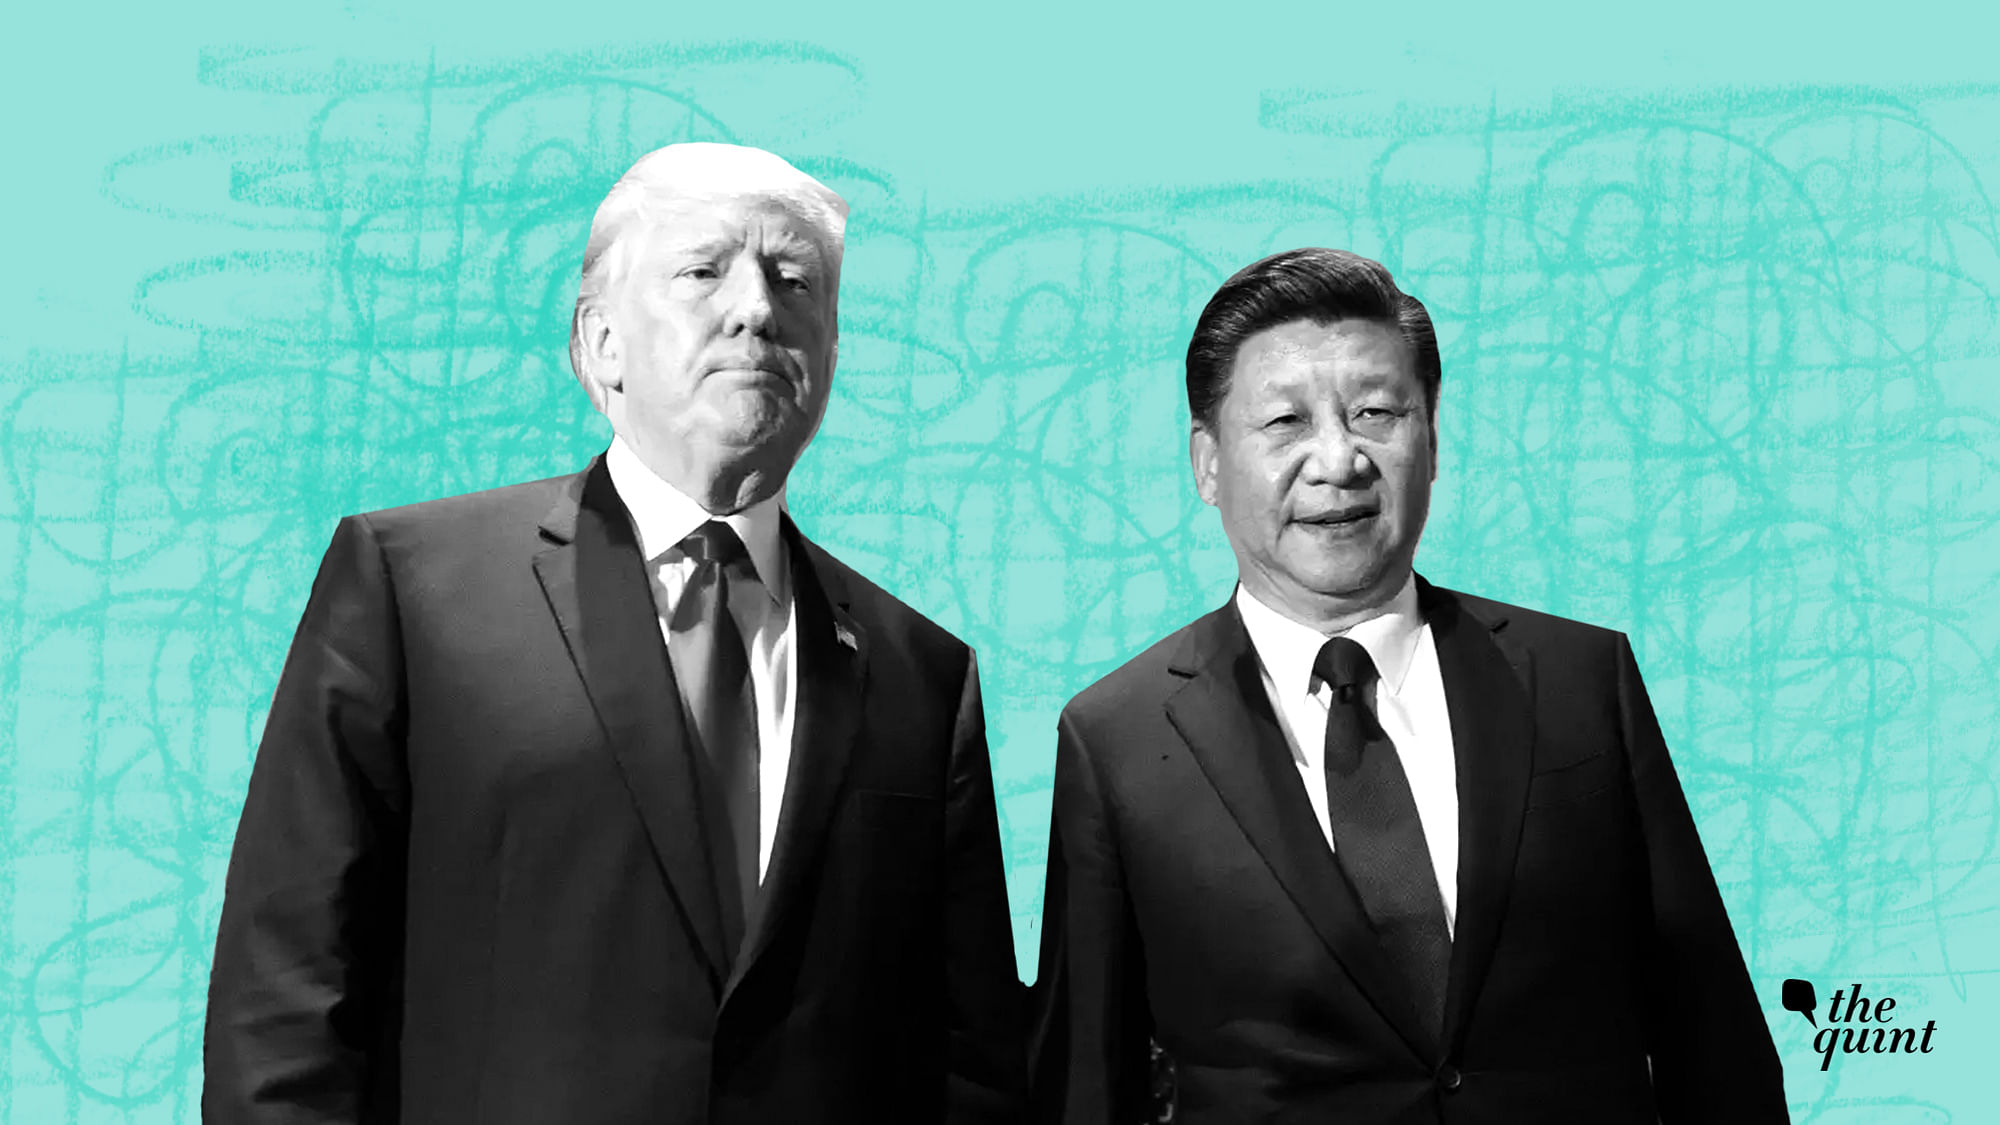 (From left to right) US President Donald Trump and Chinese President Xi Jinping.&nbsp;